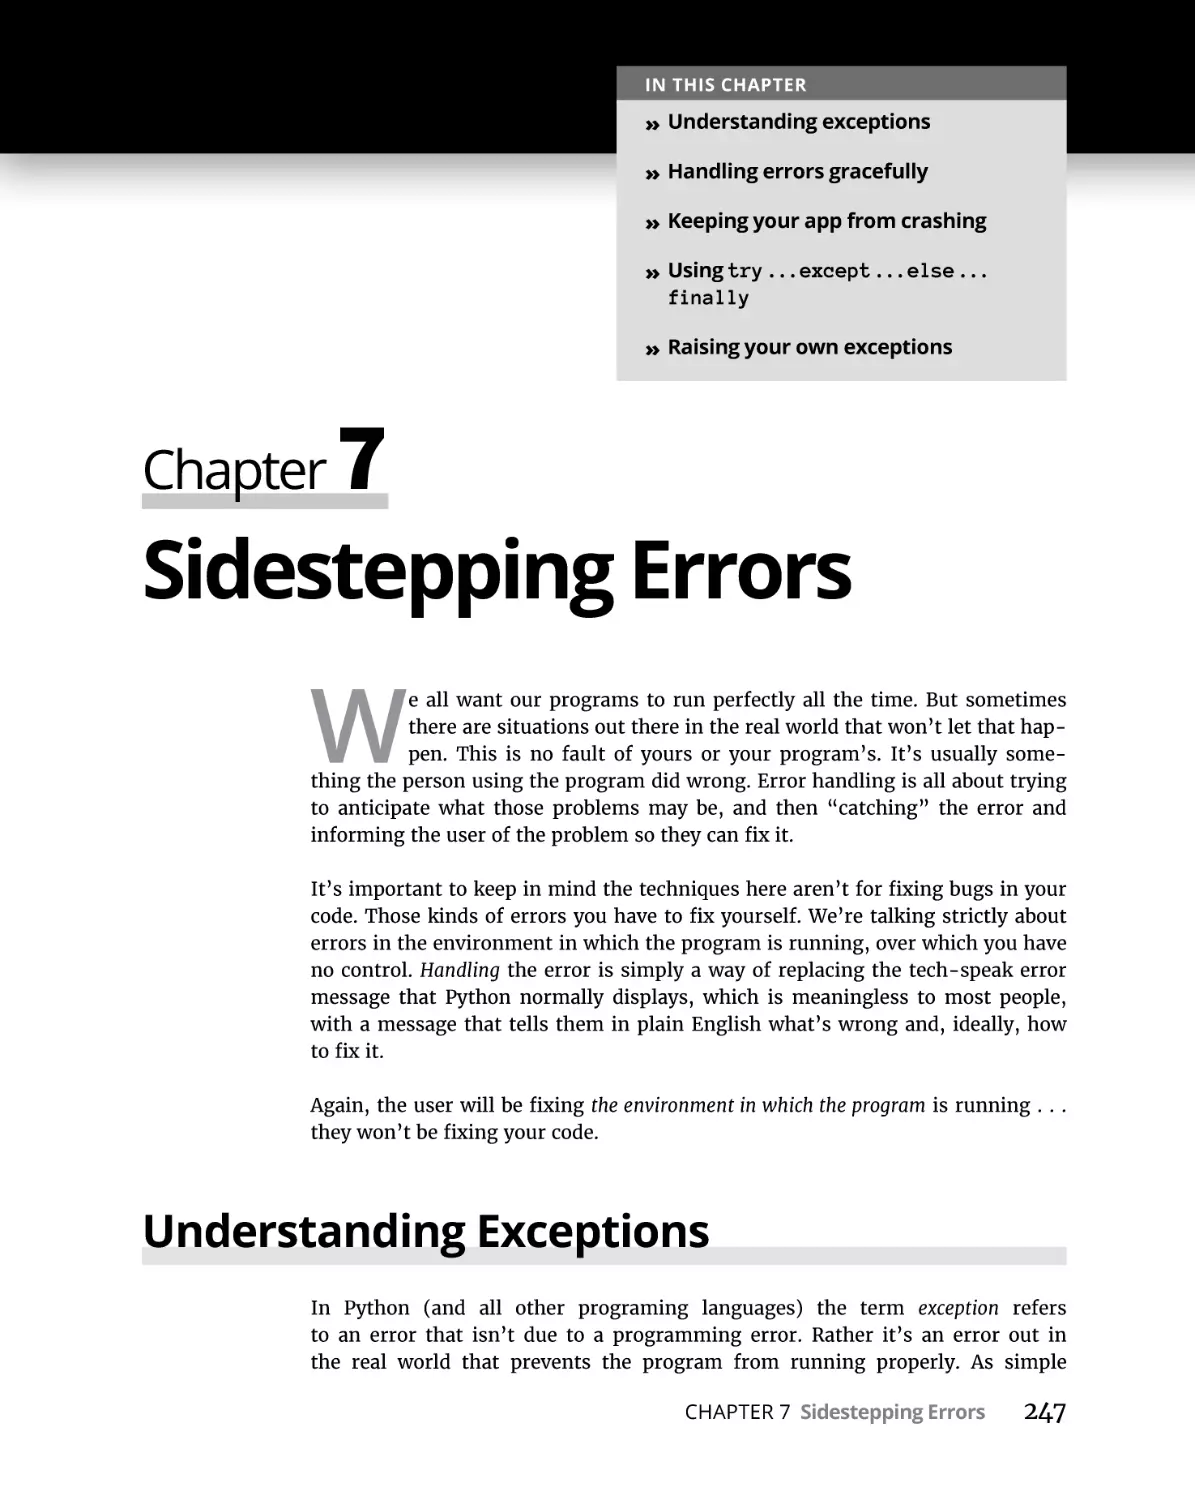 Chapter 7 Sidestepping Errors
Understanding Exceptions